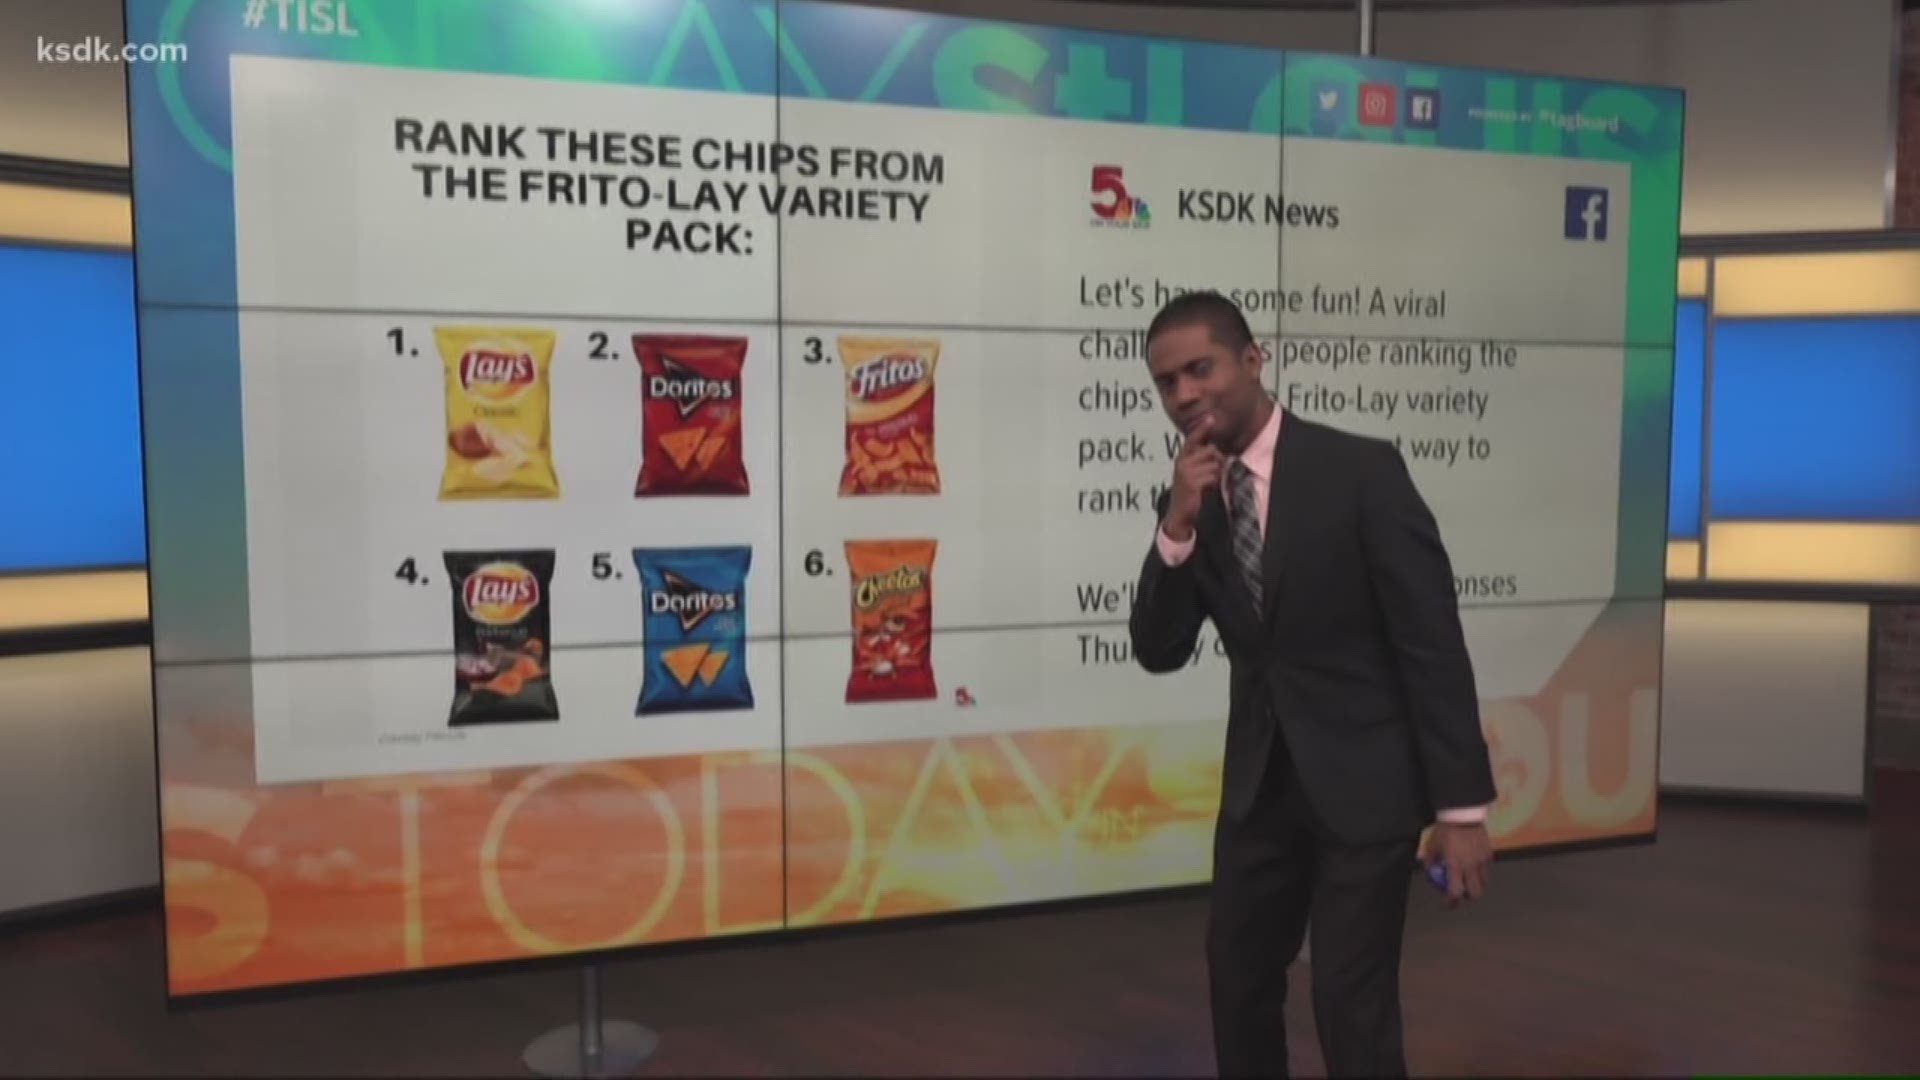 The Frito-Lay variety pack ranking has sparked a fiery debate online.